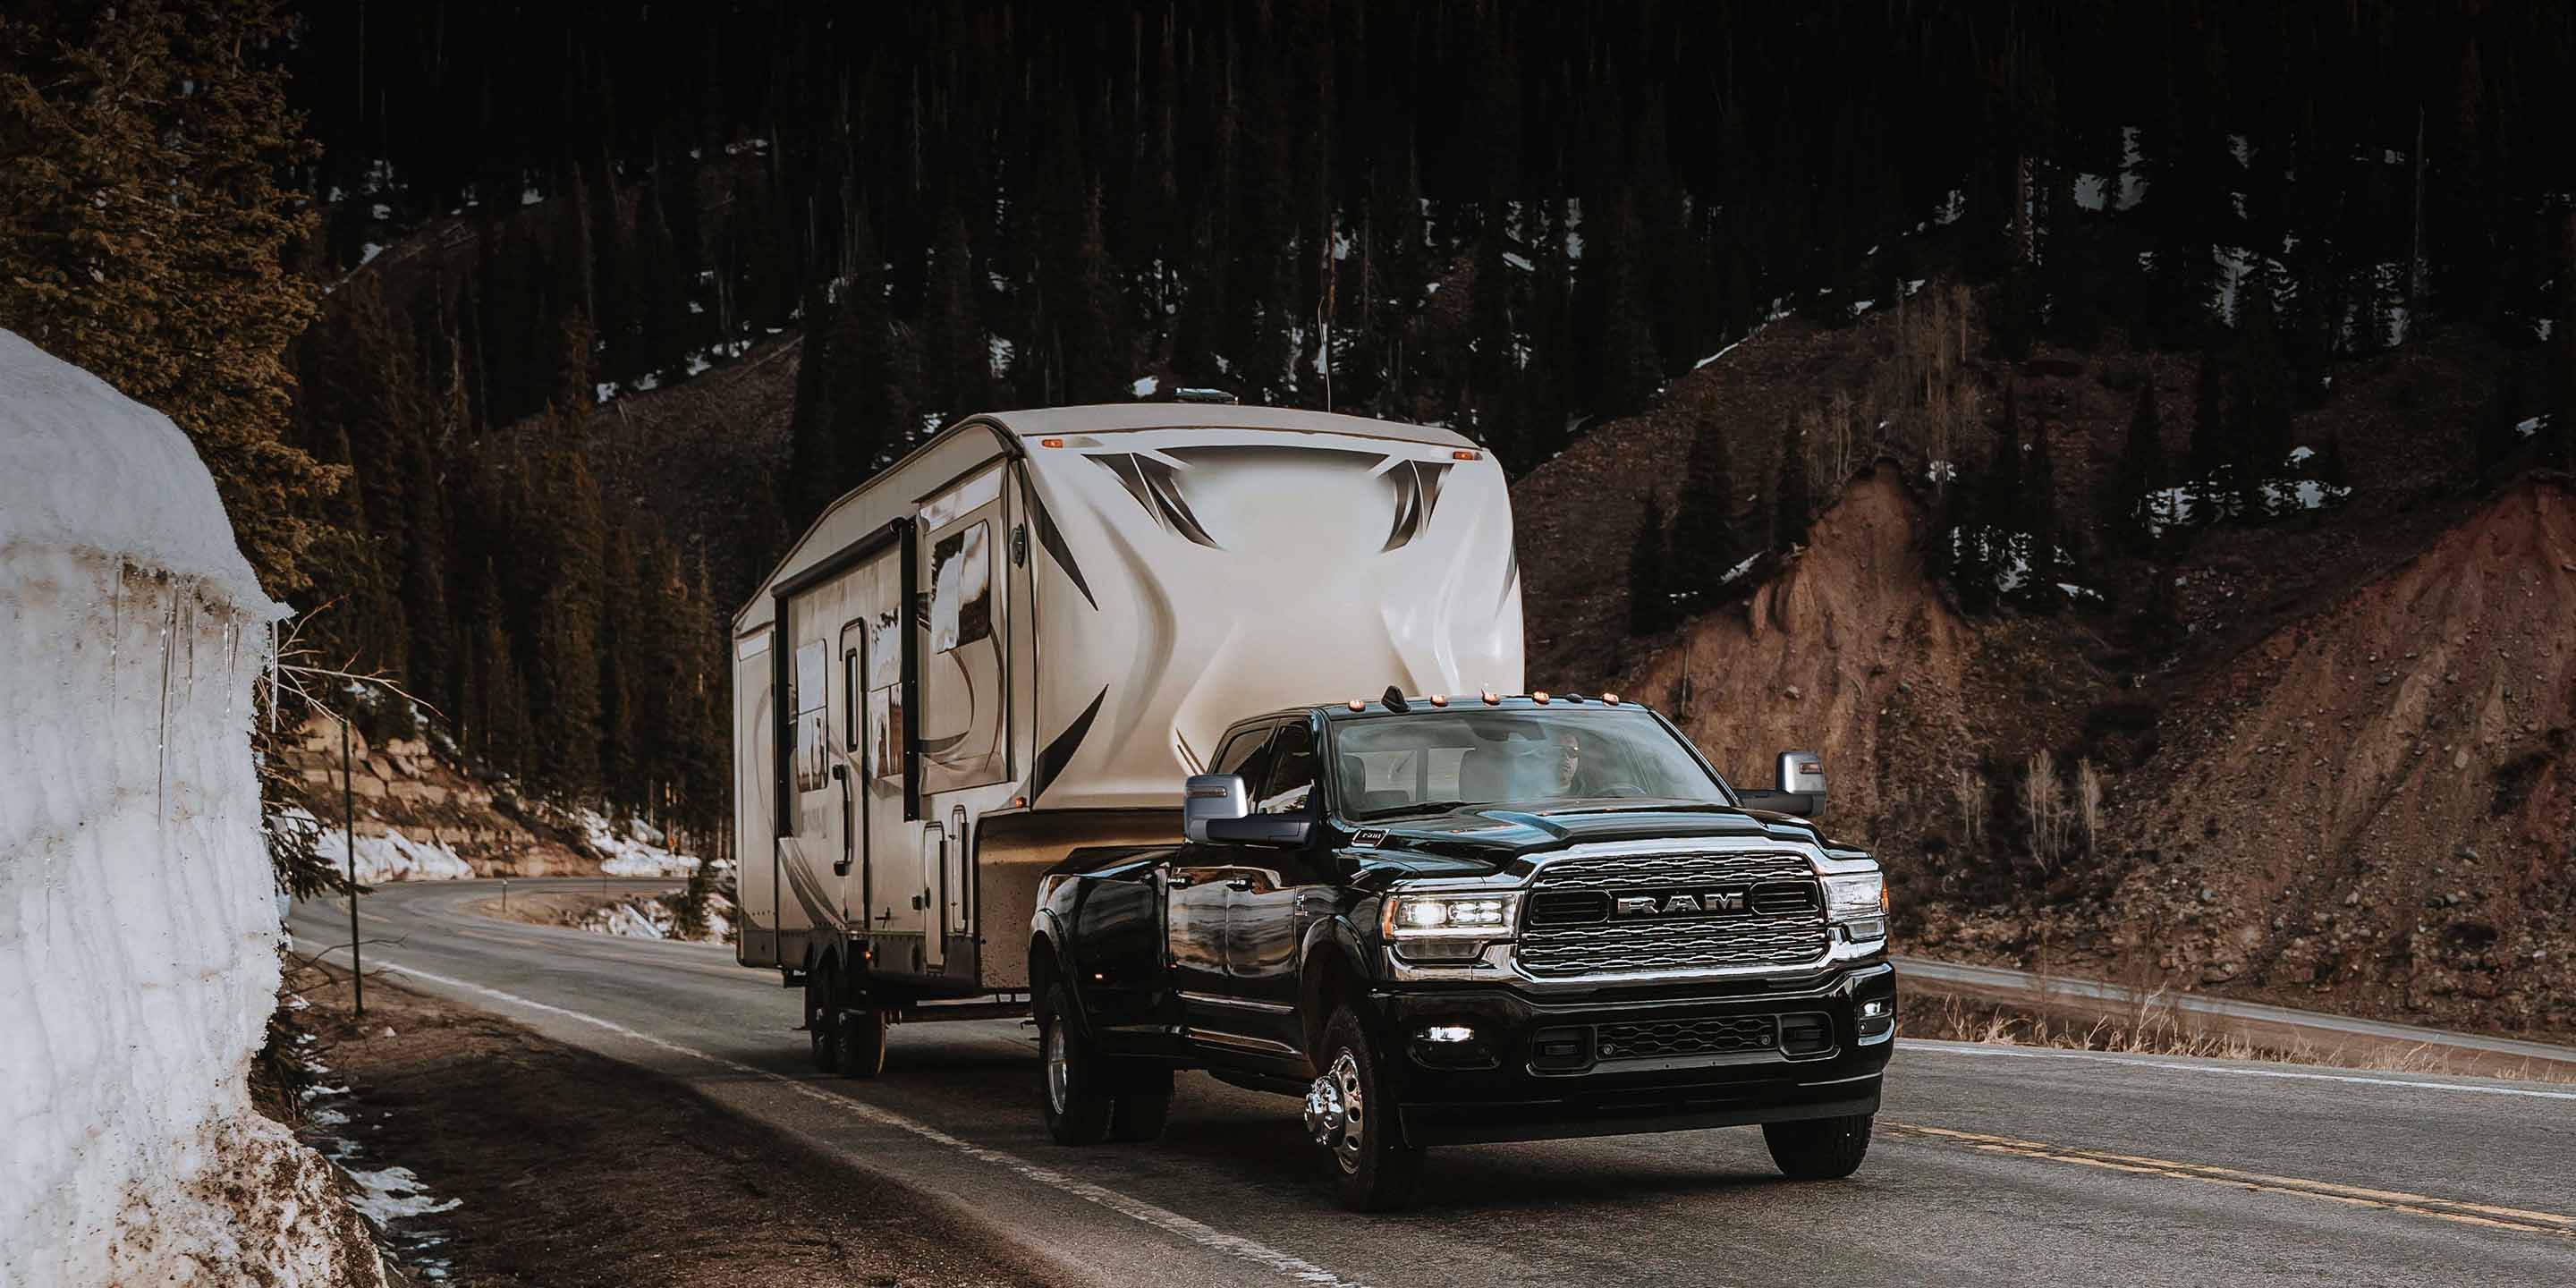 A 2023 Ram 3500 Limited Crew Cab towing a fifth wheel travel trailer as it is driven down a winding mountain road.